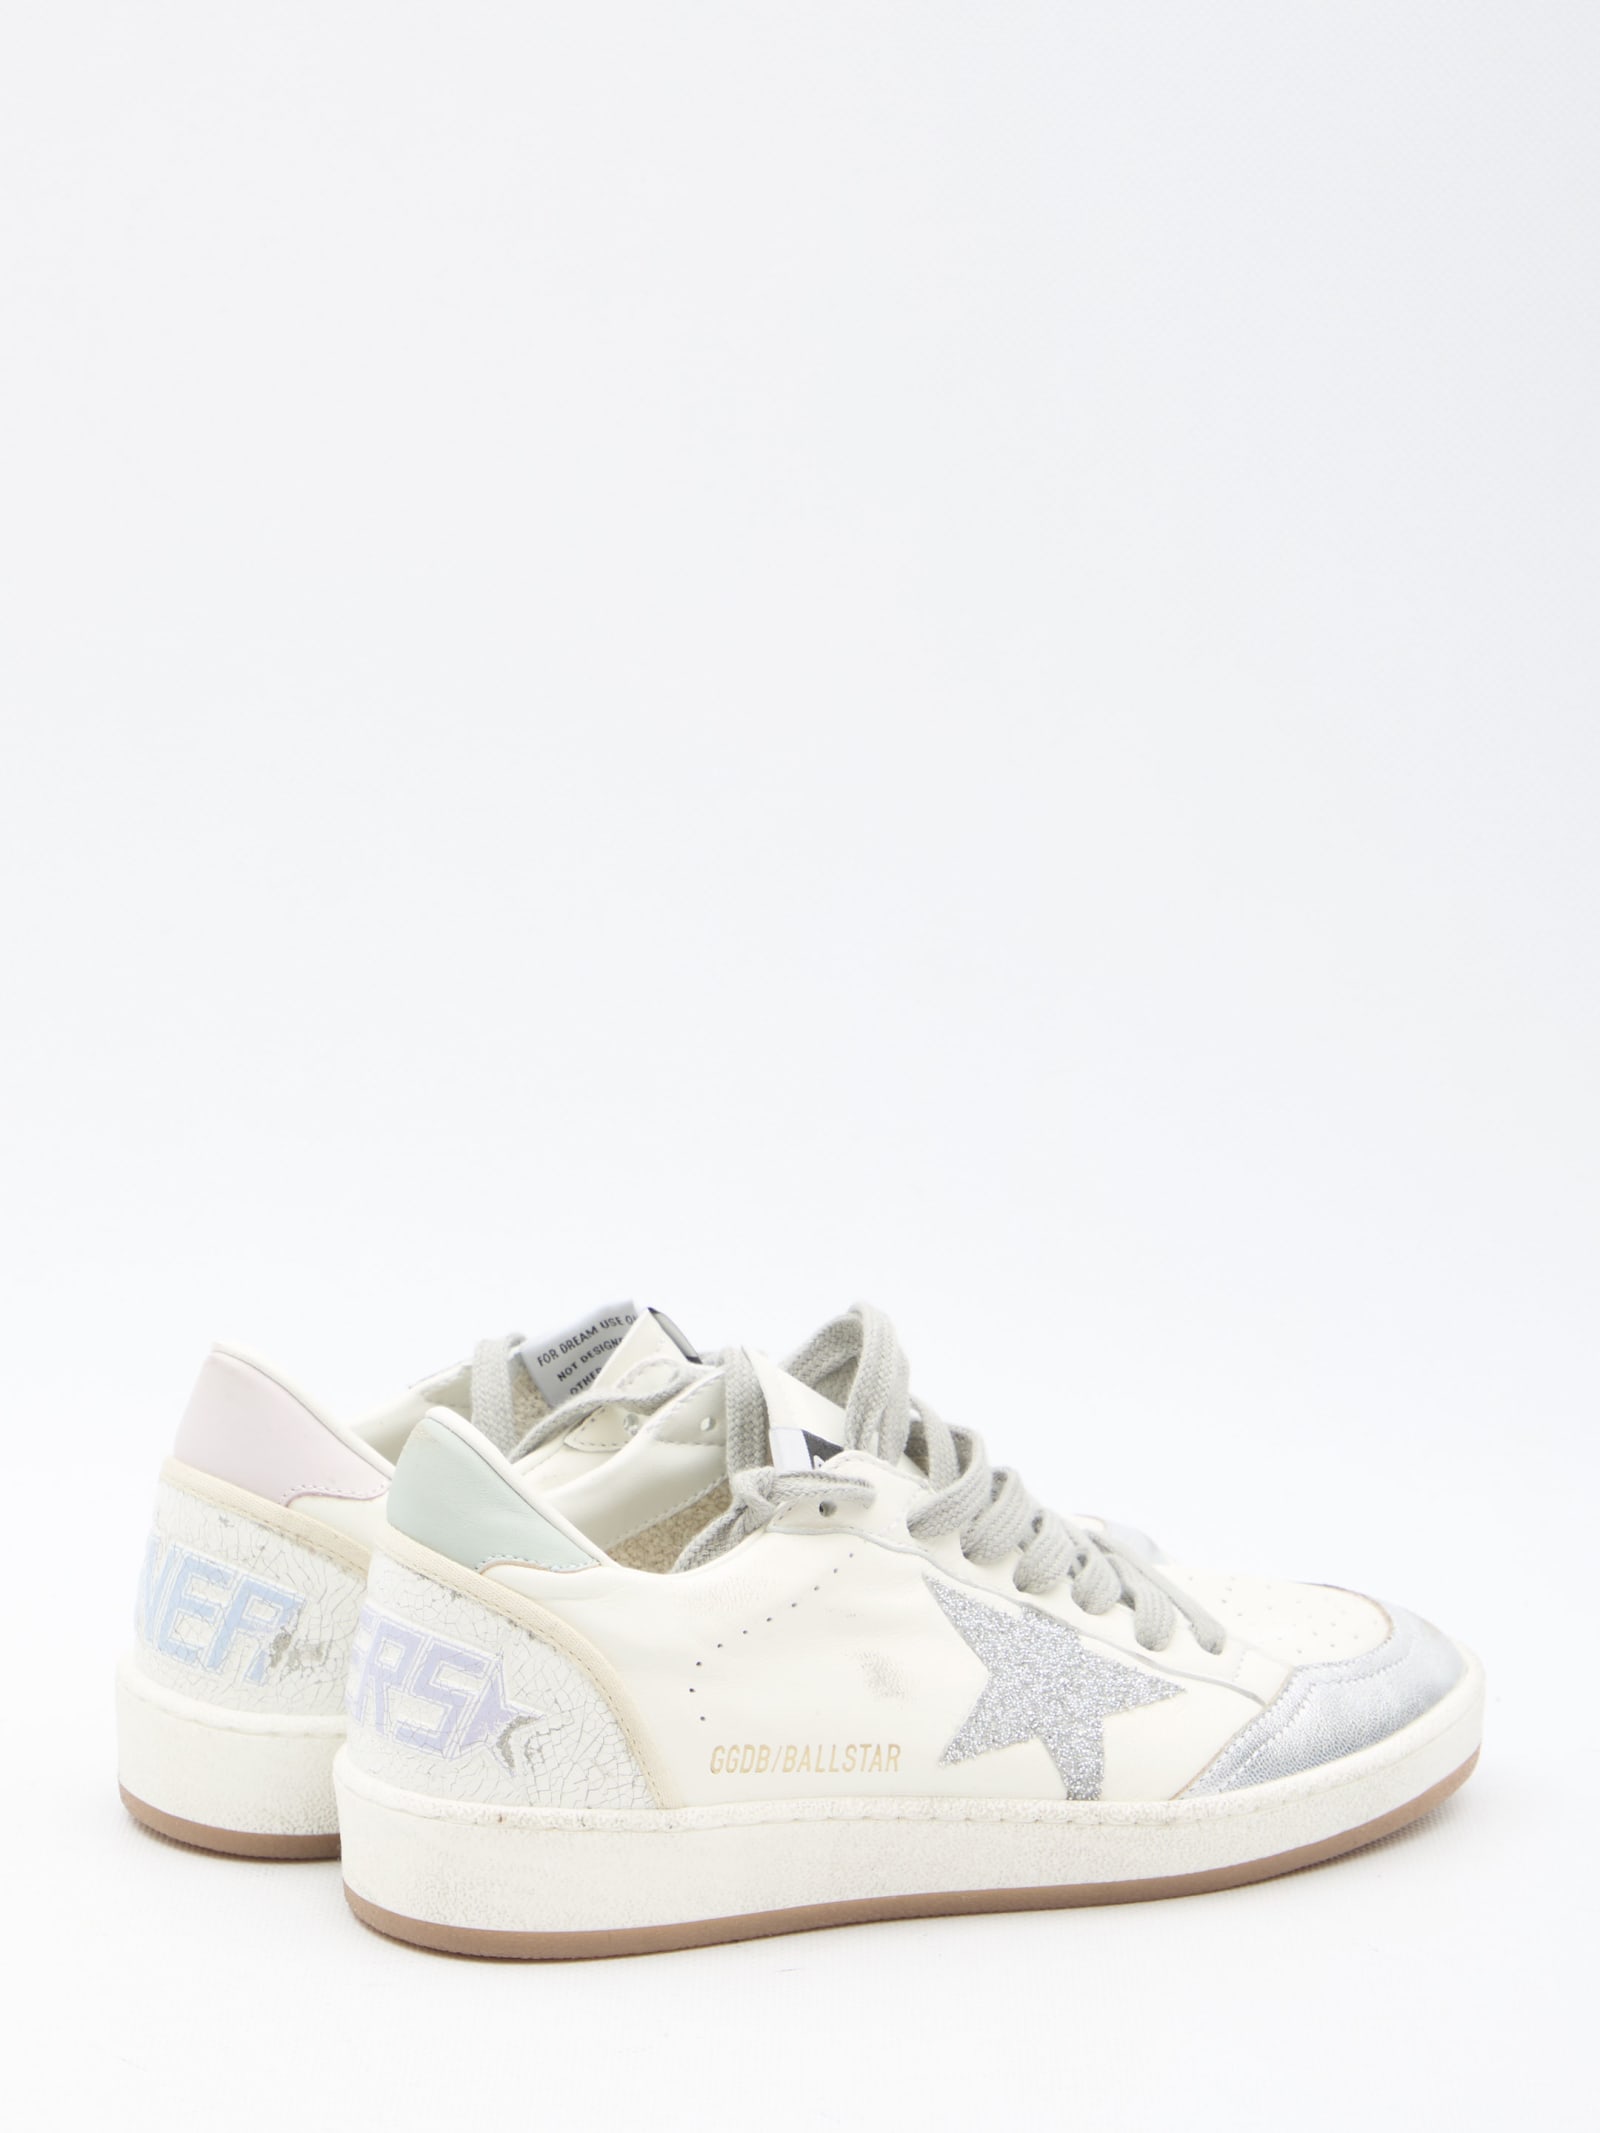 Shop Golden Goose Ball-star Sneakers In Bianco